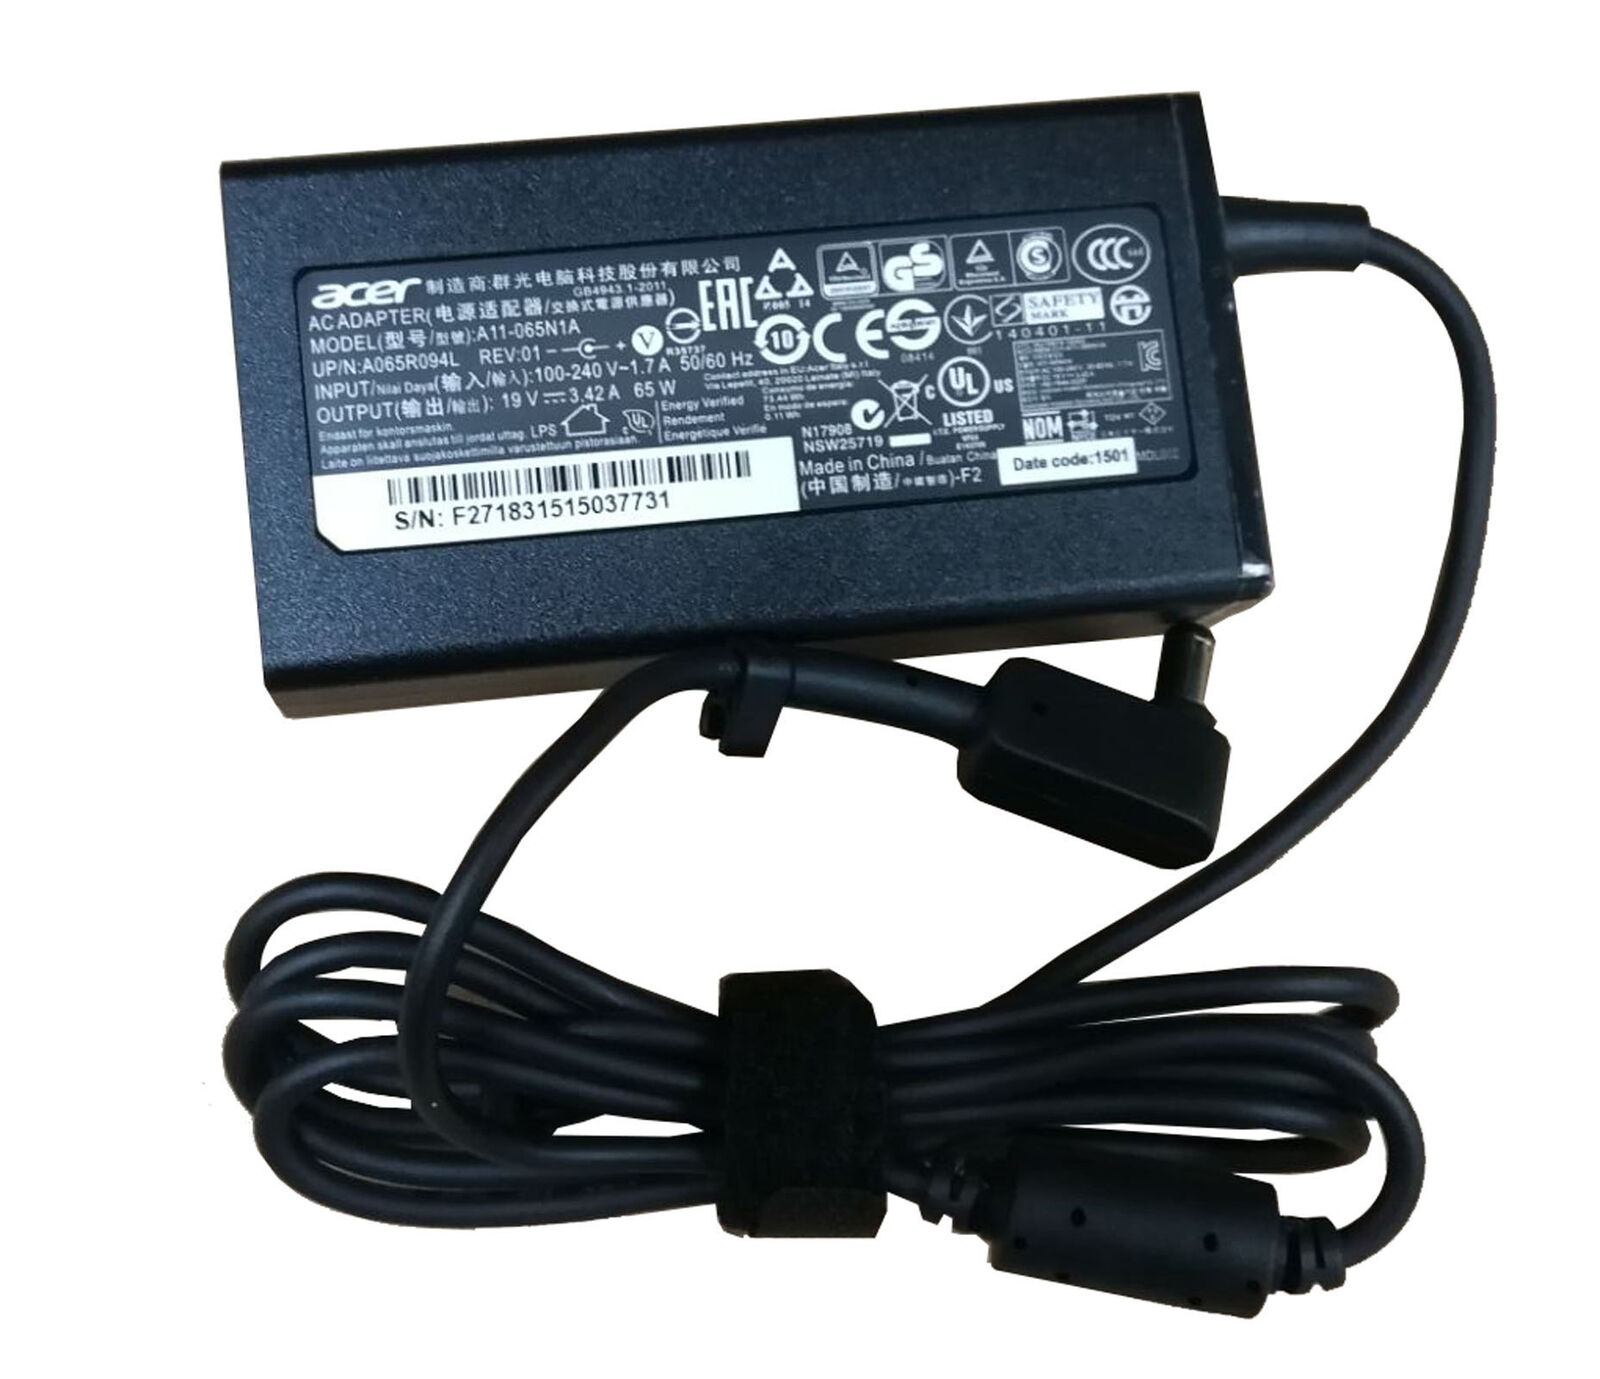 65W Acer Chromebook CB3-111 Charger AC Adapter Power Cord